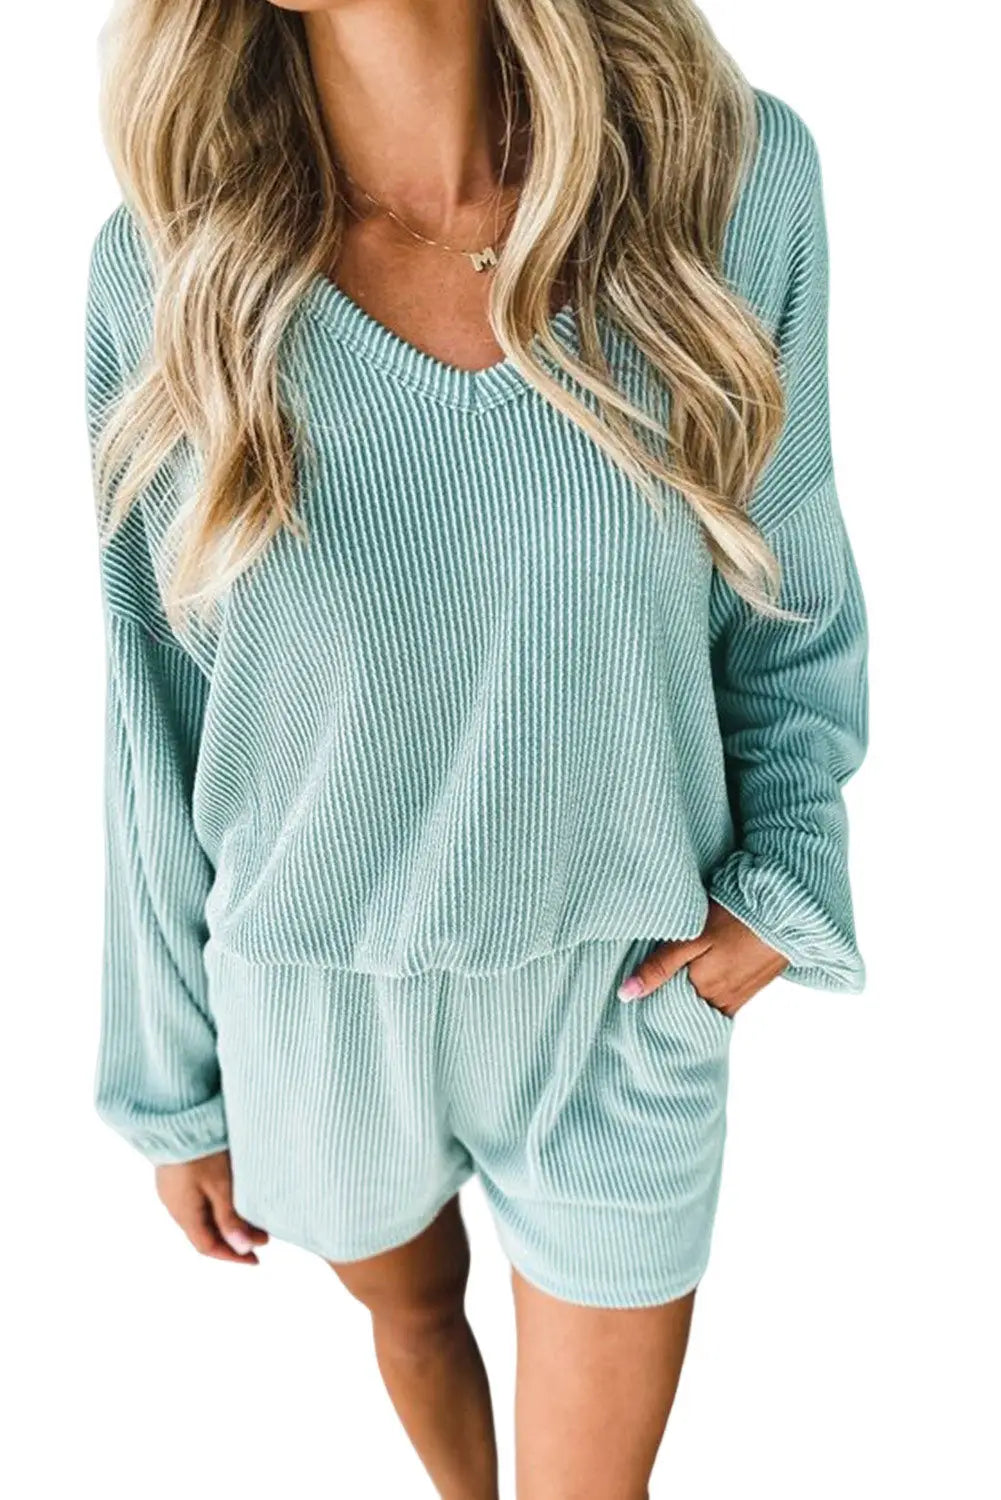 Mist blue corded v neck slouchy top pocketed shorts set -